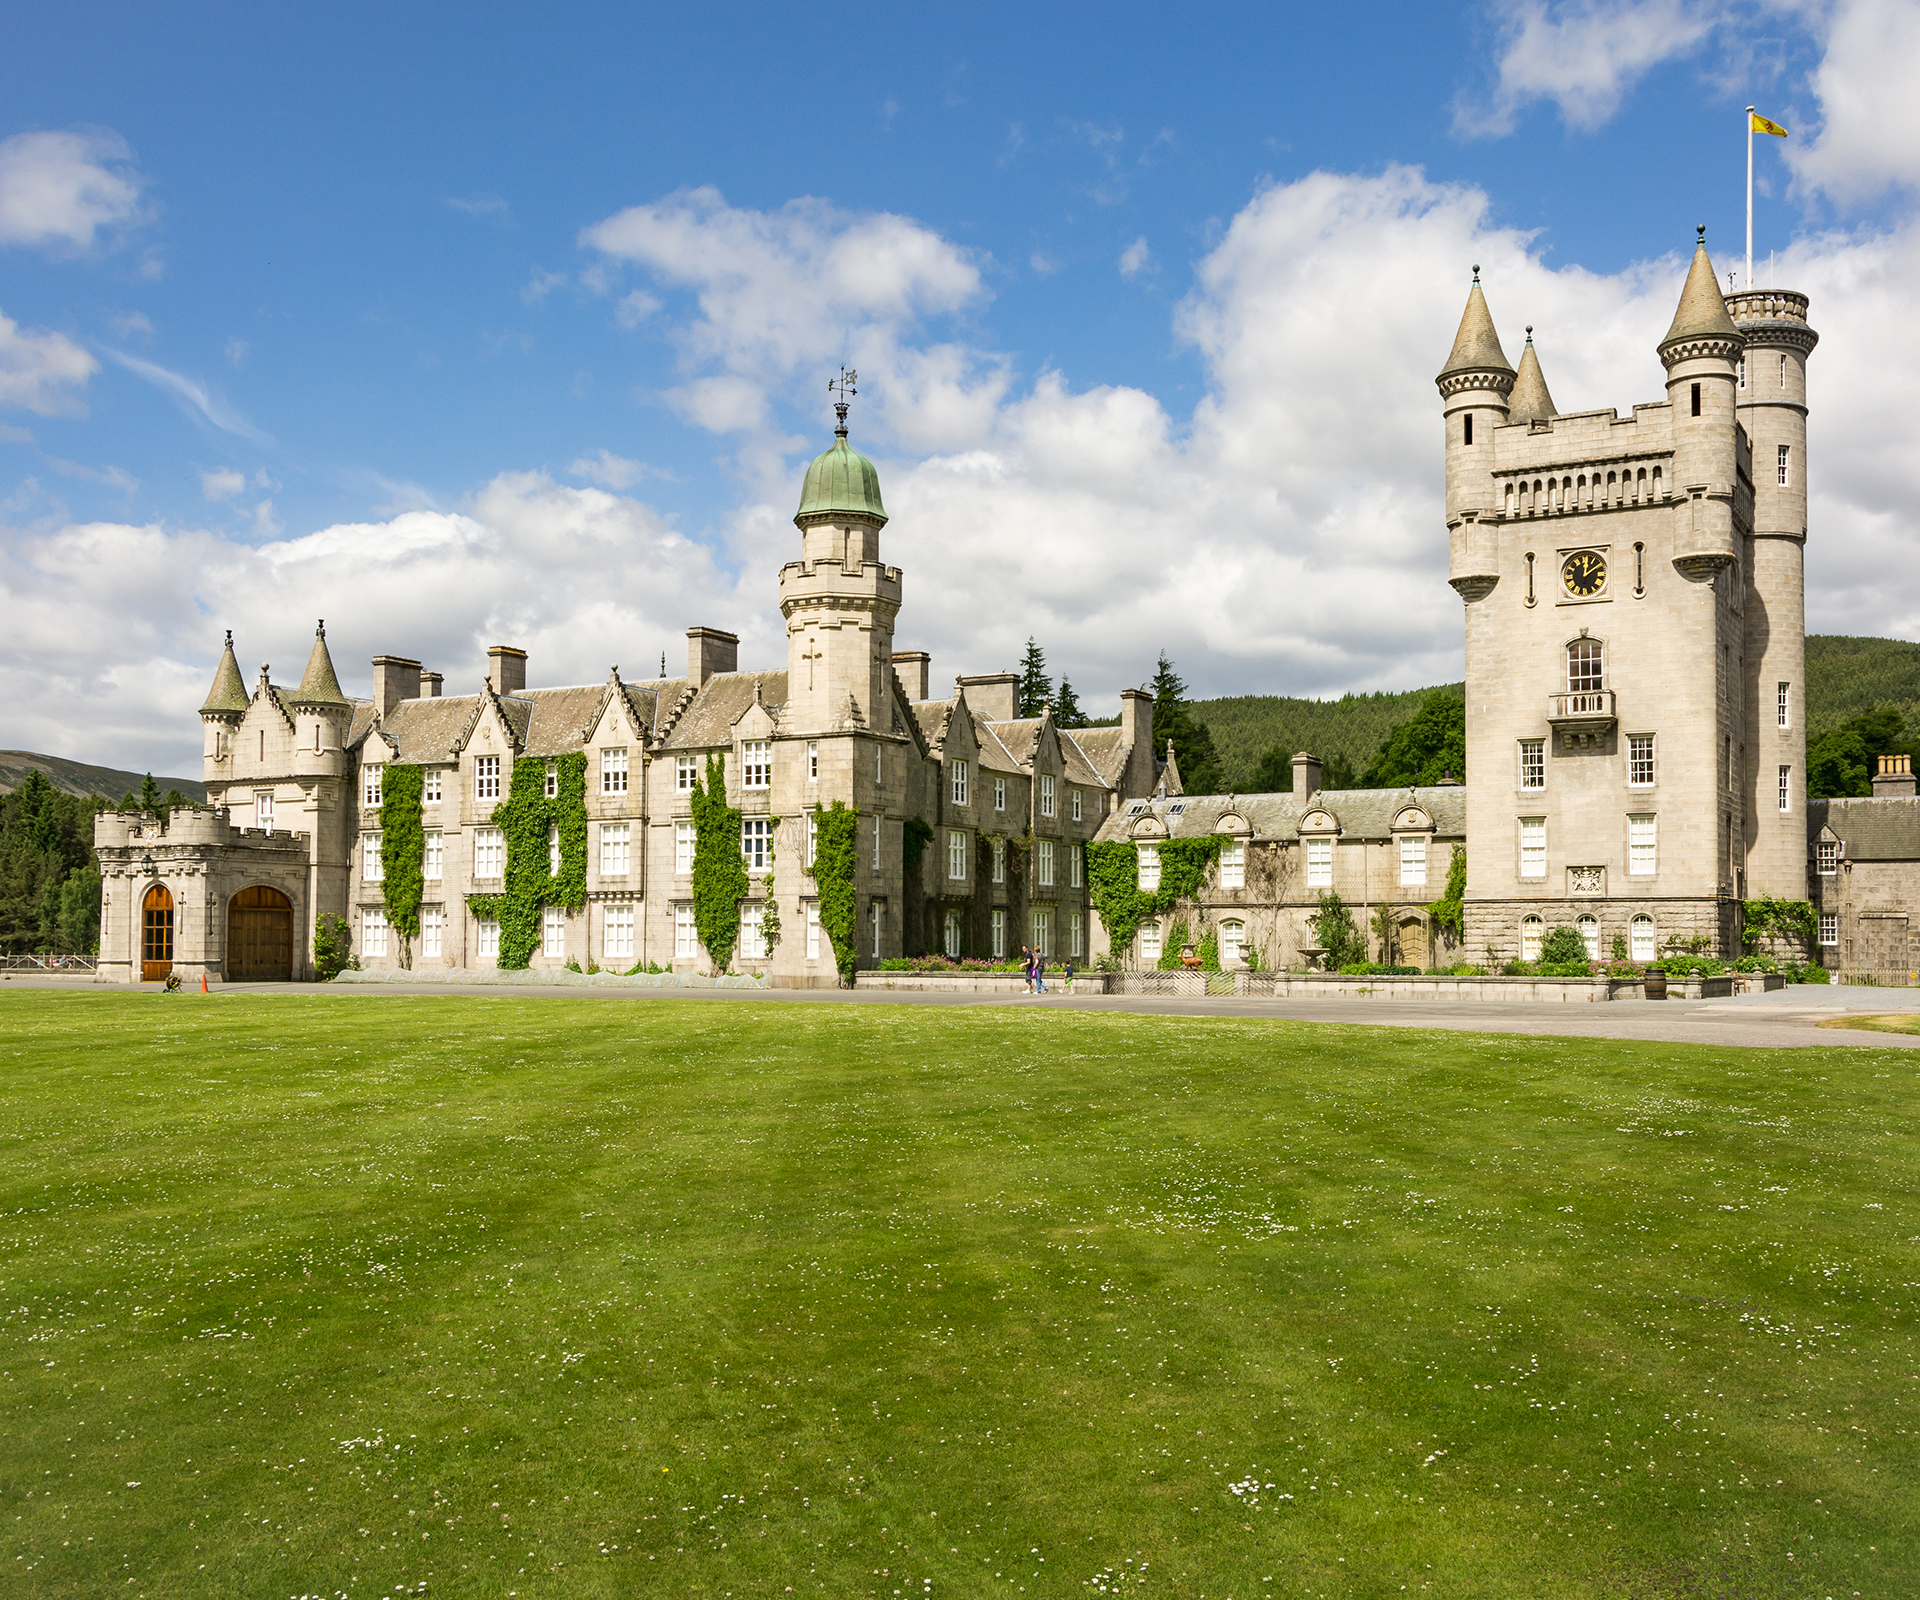 Balmoral Castle, homes owned by the British royal family